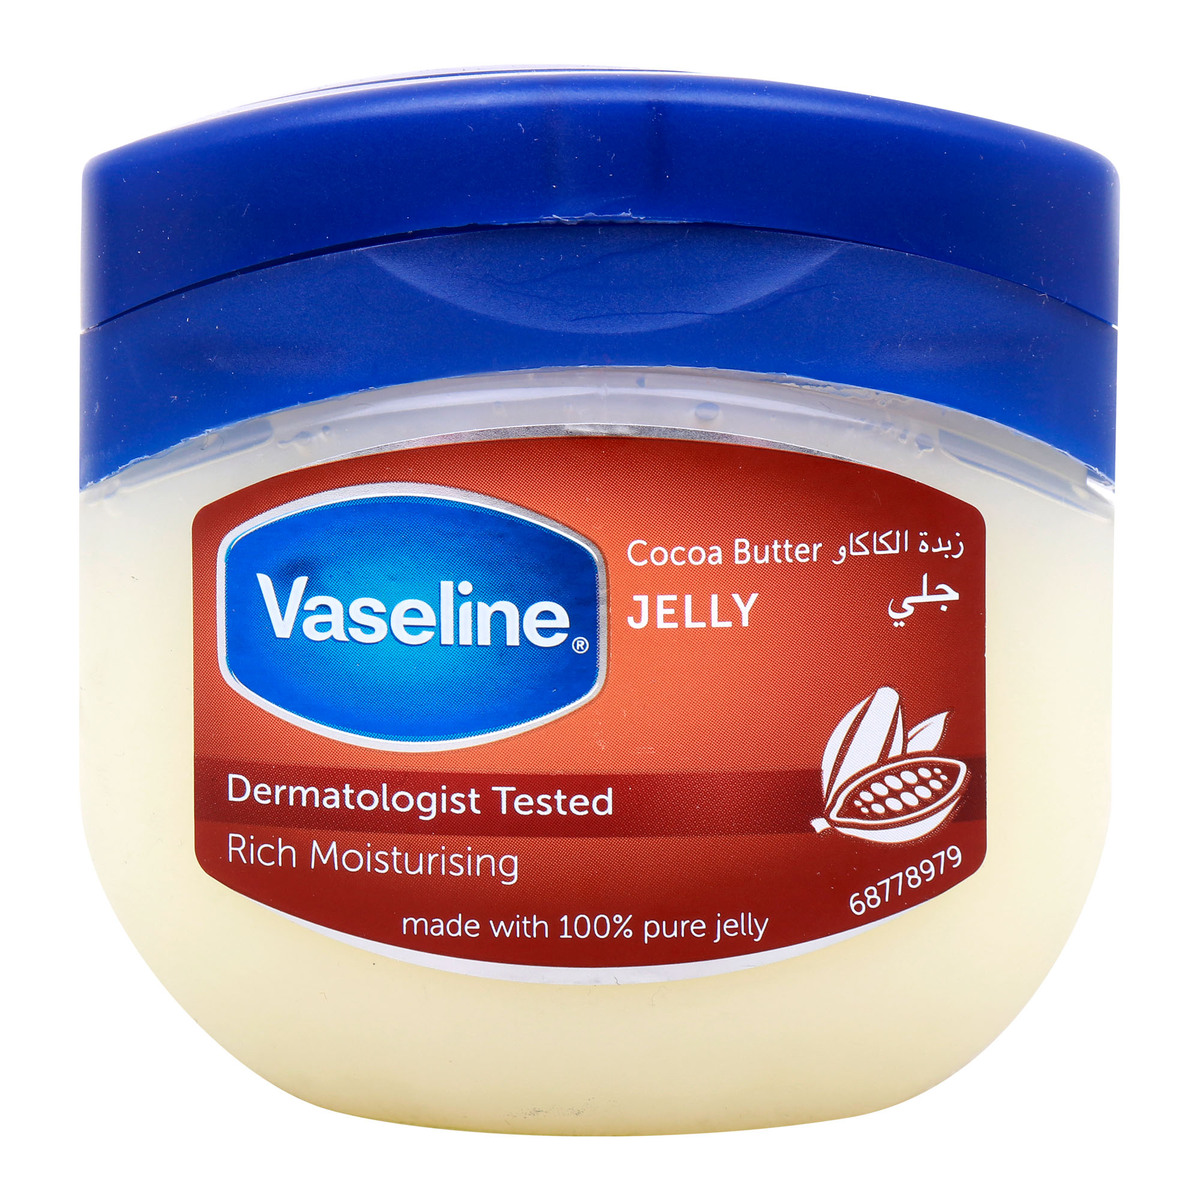 Vaseline Healing Jelly Cocoa Butter, 250 ml